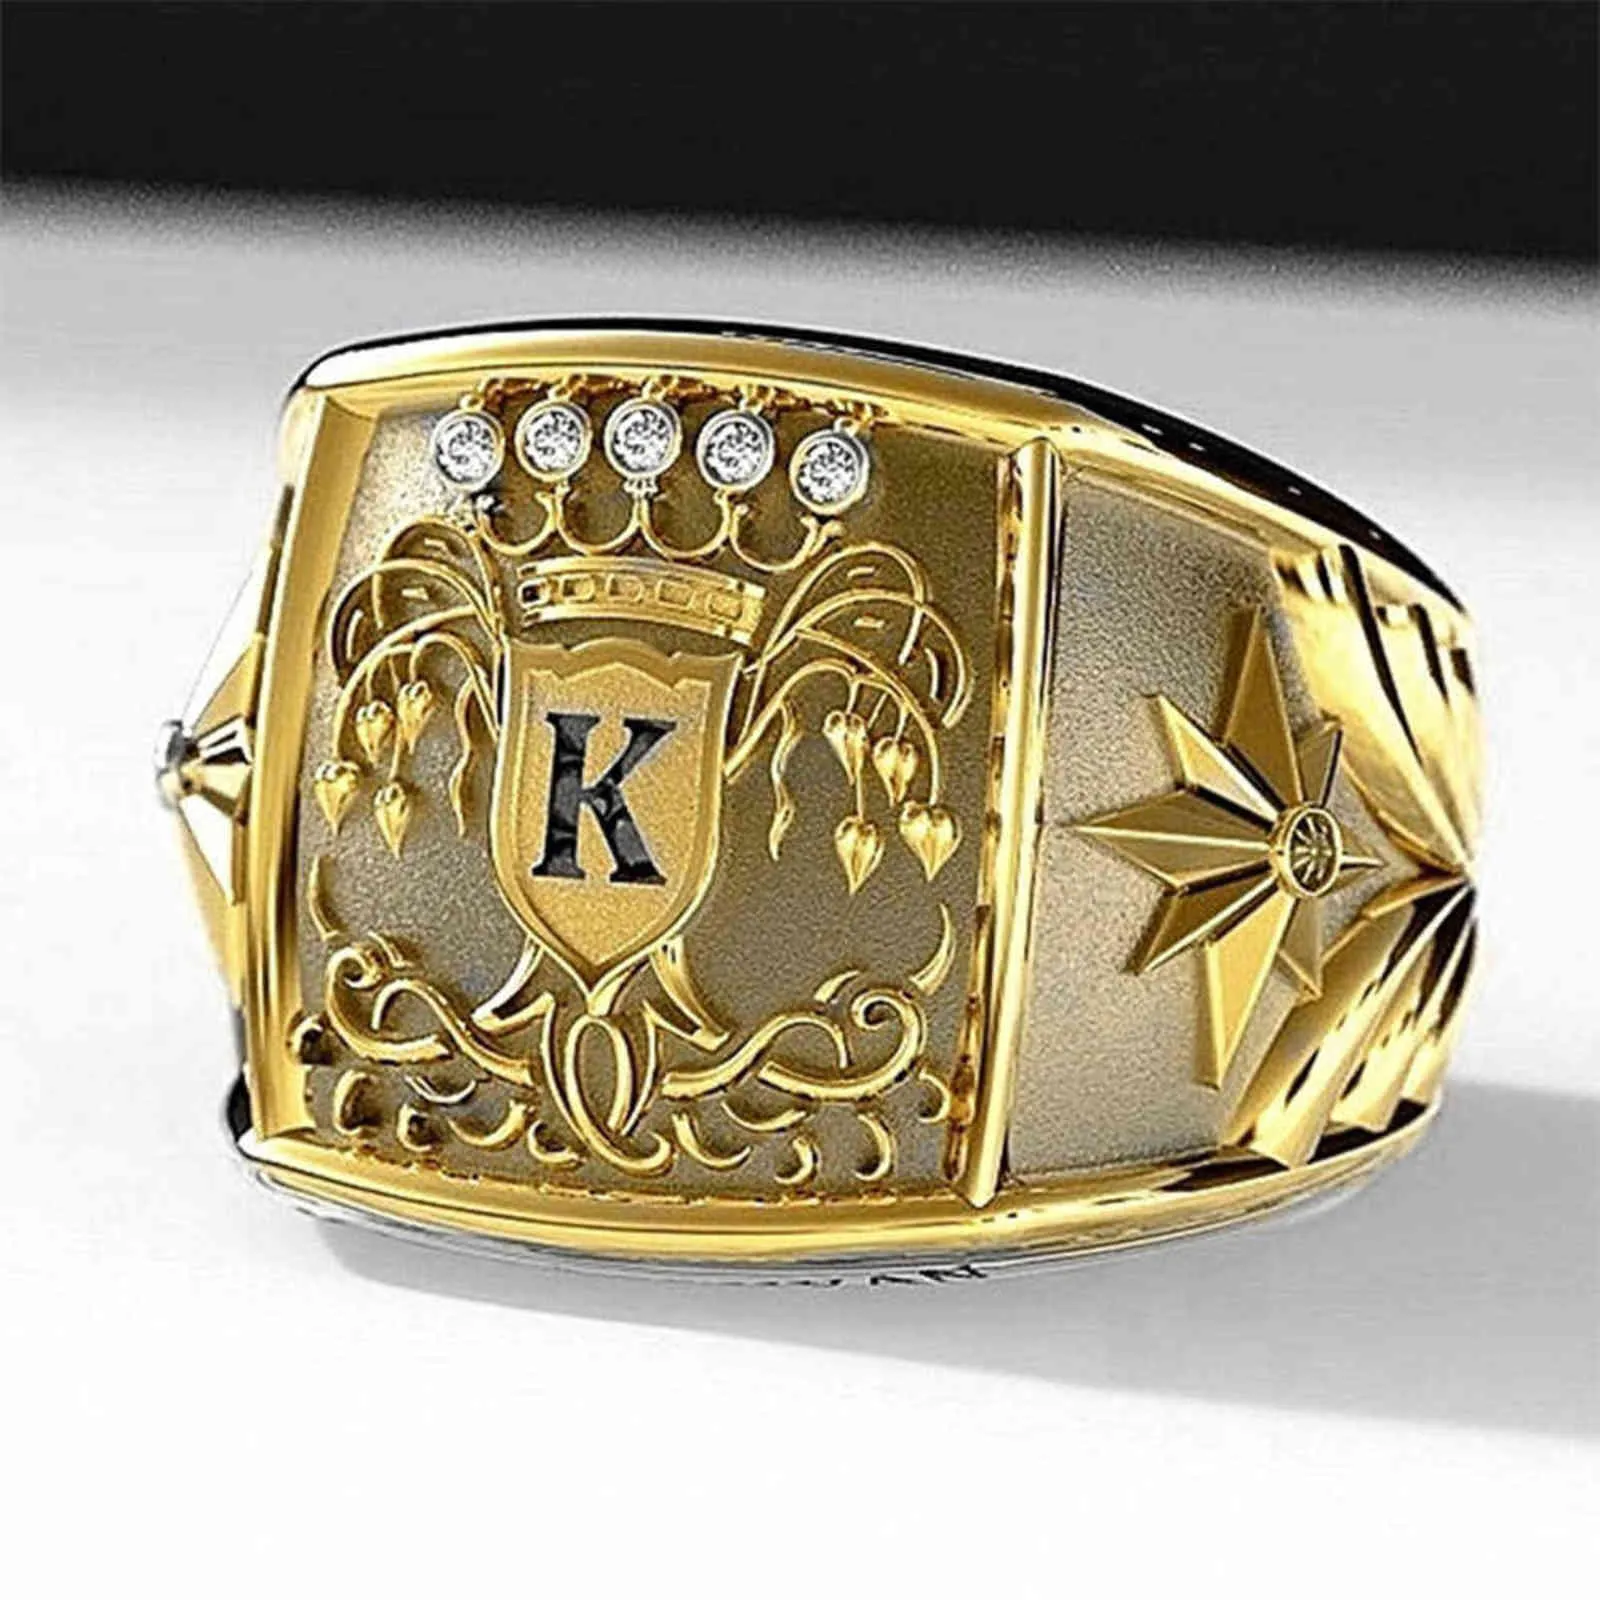 SNIPER Silver Bullet Ring for Men with 14K Gold Flames by Ecks